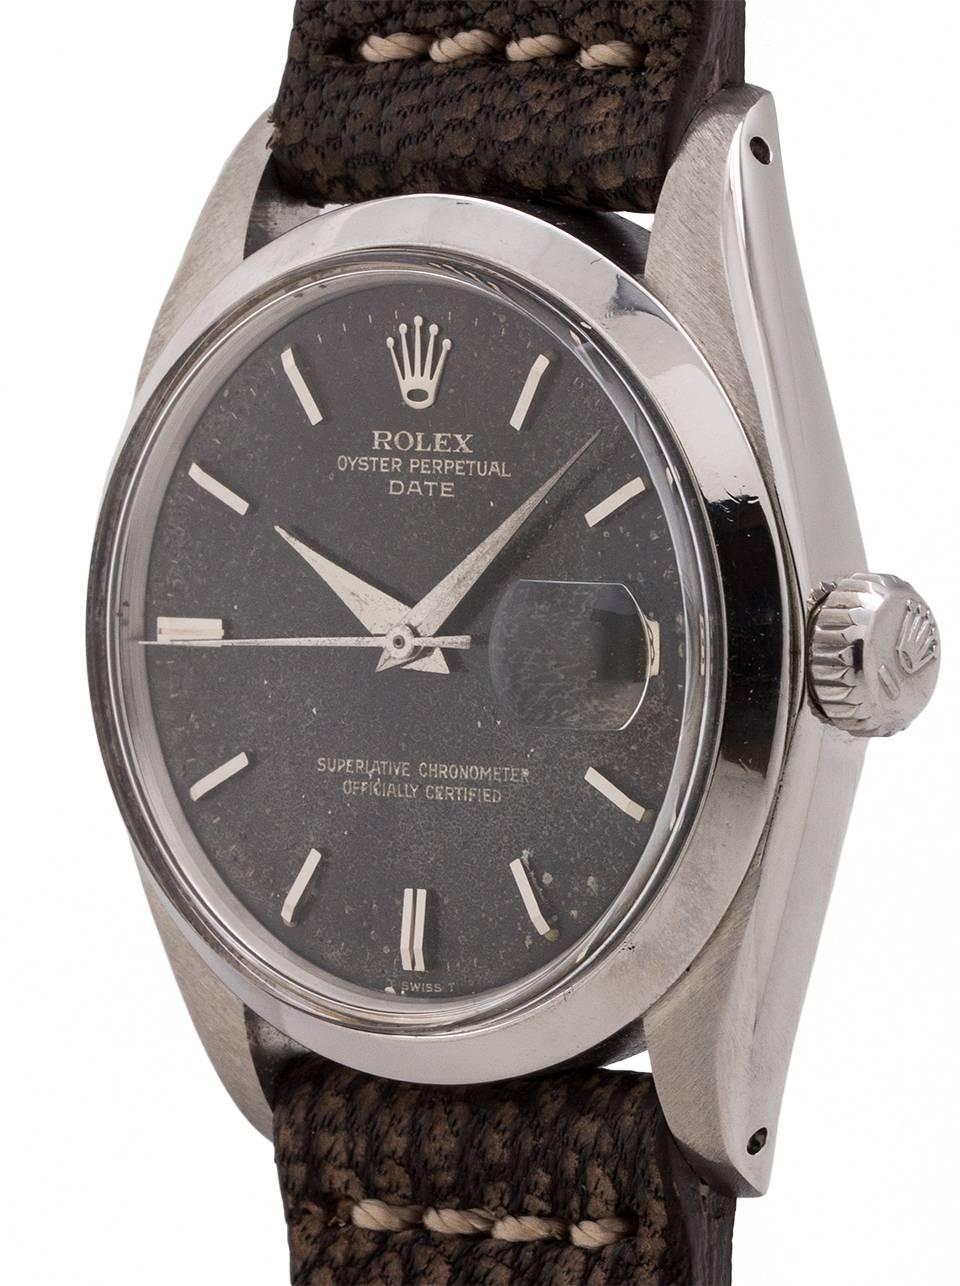 
An vintage Rolex Oyster Perpetual Date ref 1500 serial# 669,xxx circa 1966 featuring a distressed original black gilt dial. Featuring a 34mm diameter case with smooth bezel and acrylic crystal and original aged black gilt dial with applied silver